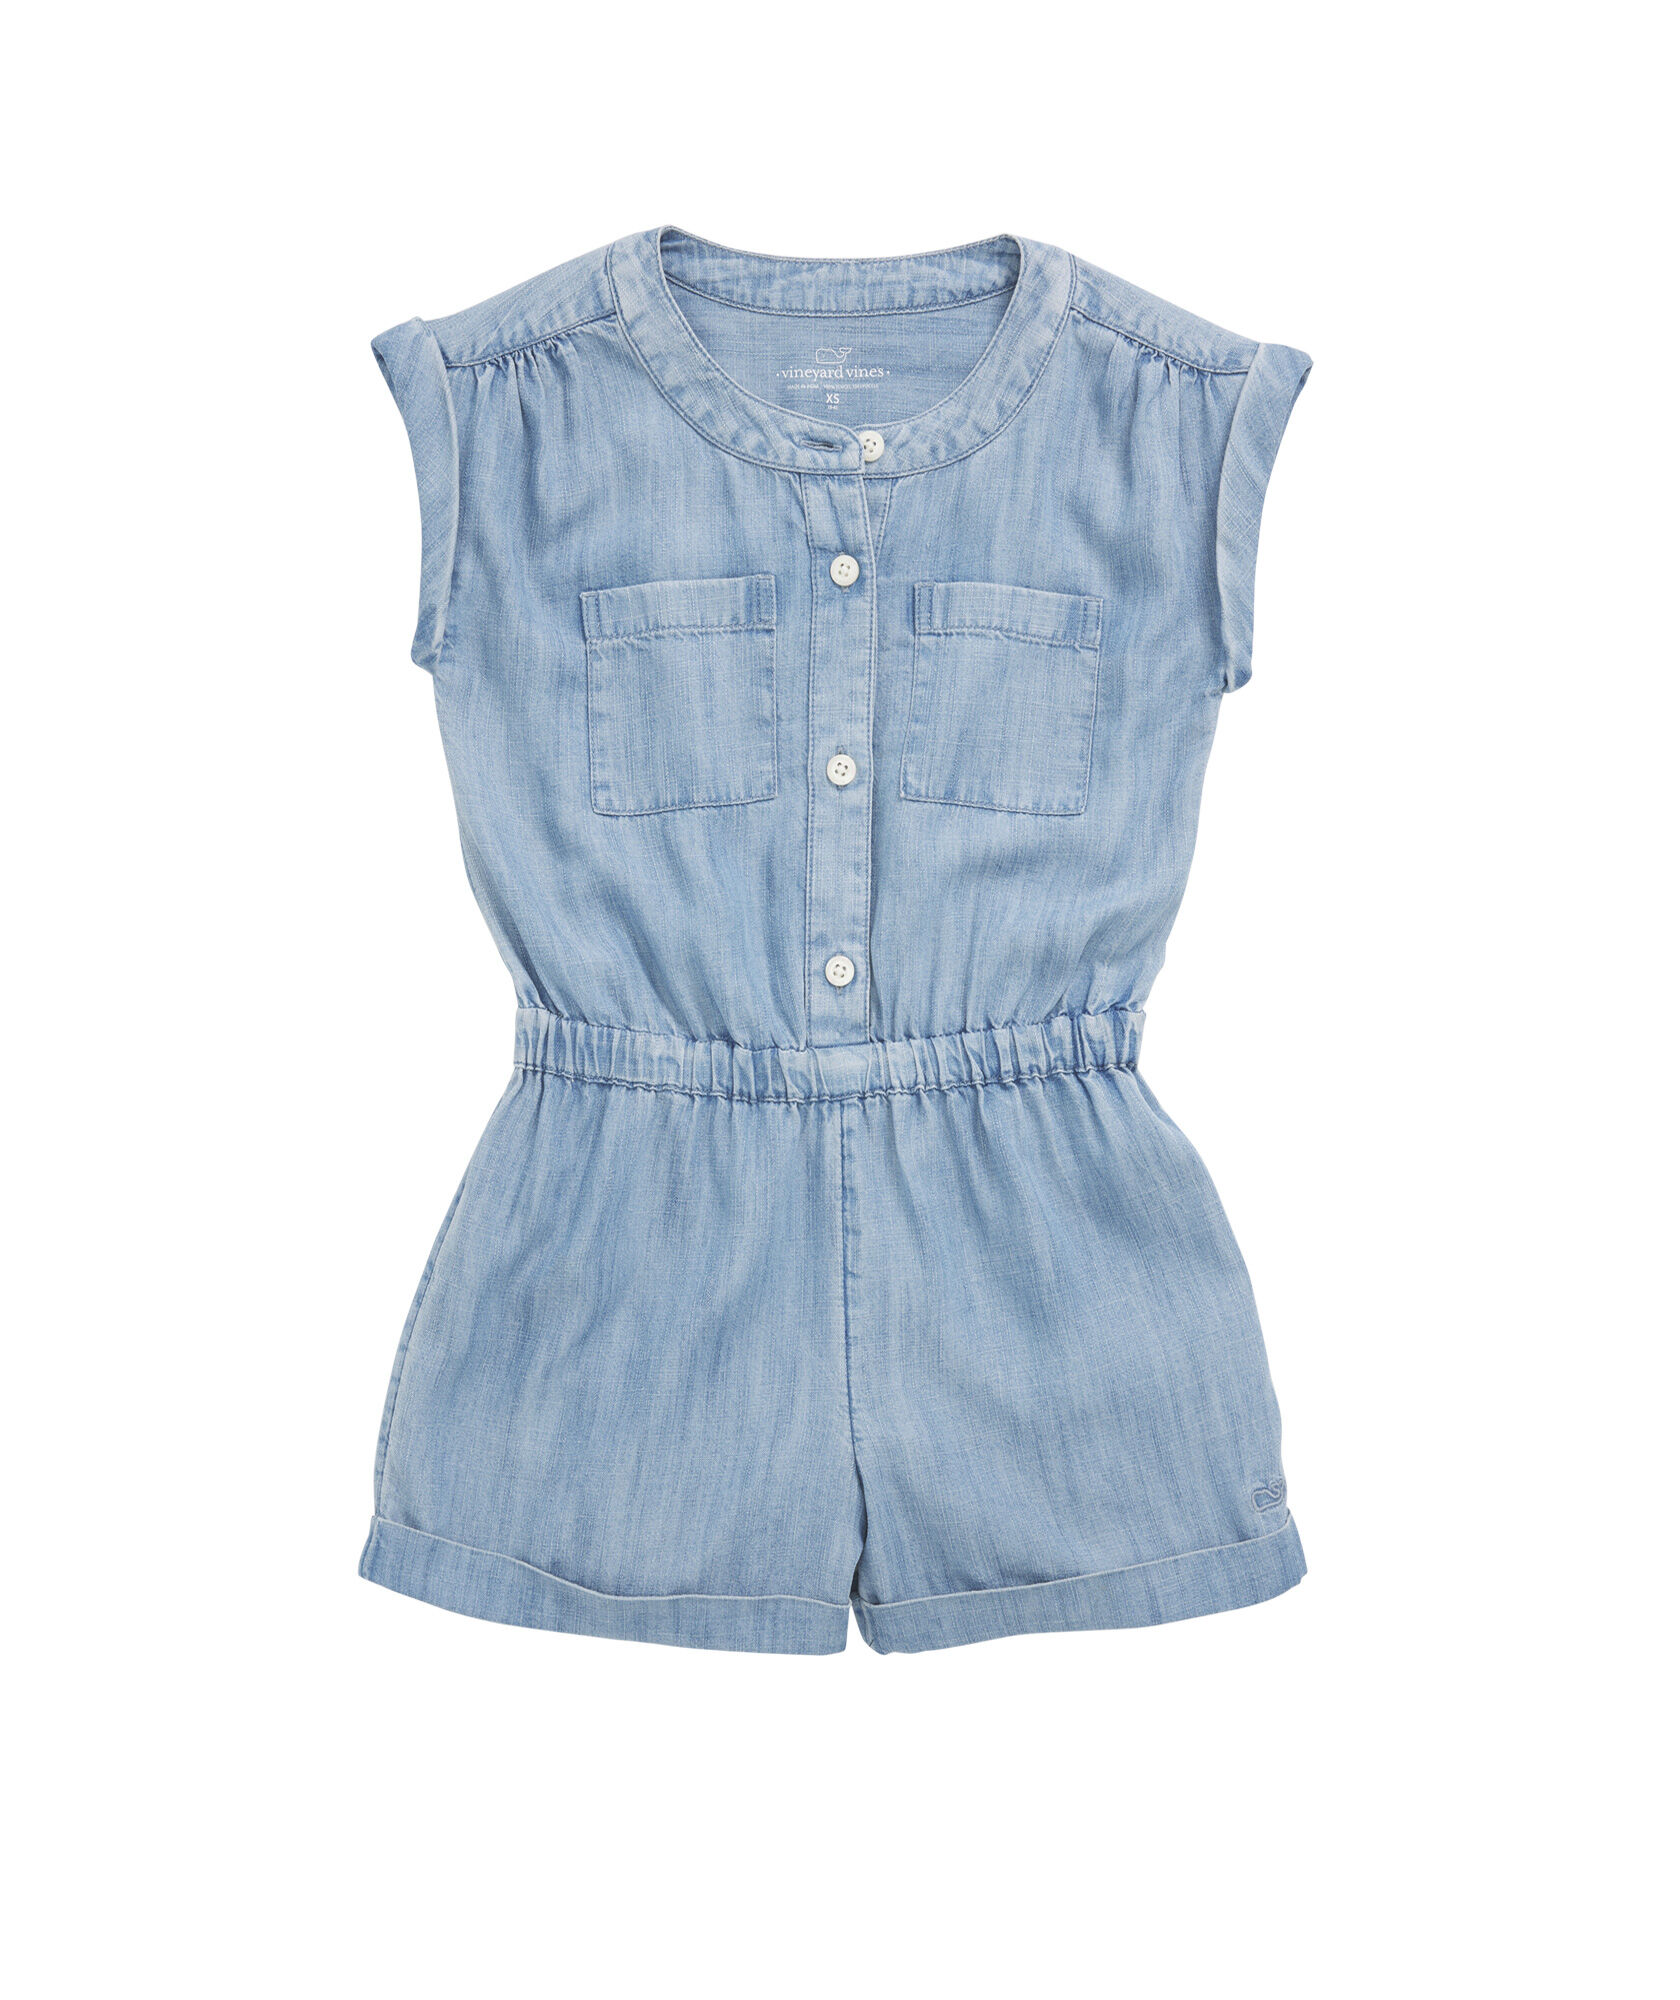 OUTLET Girls' Chambray Utility Romper